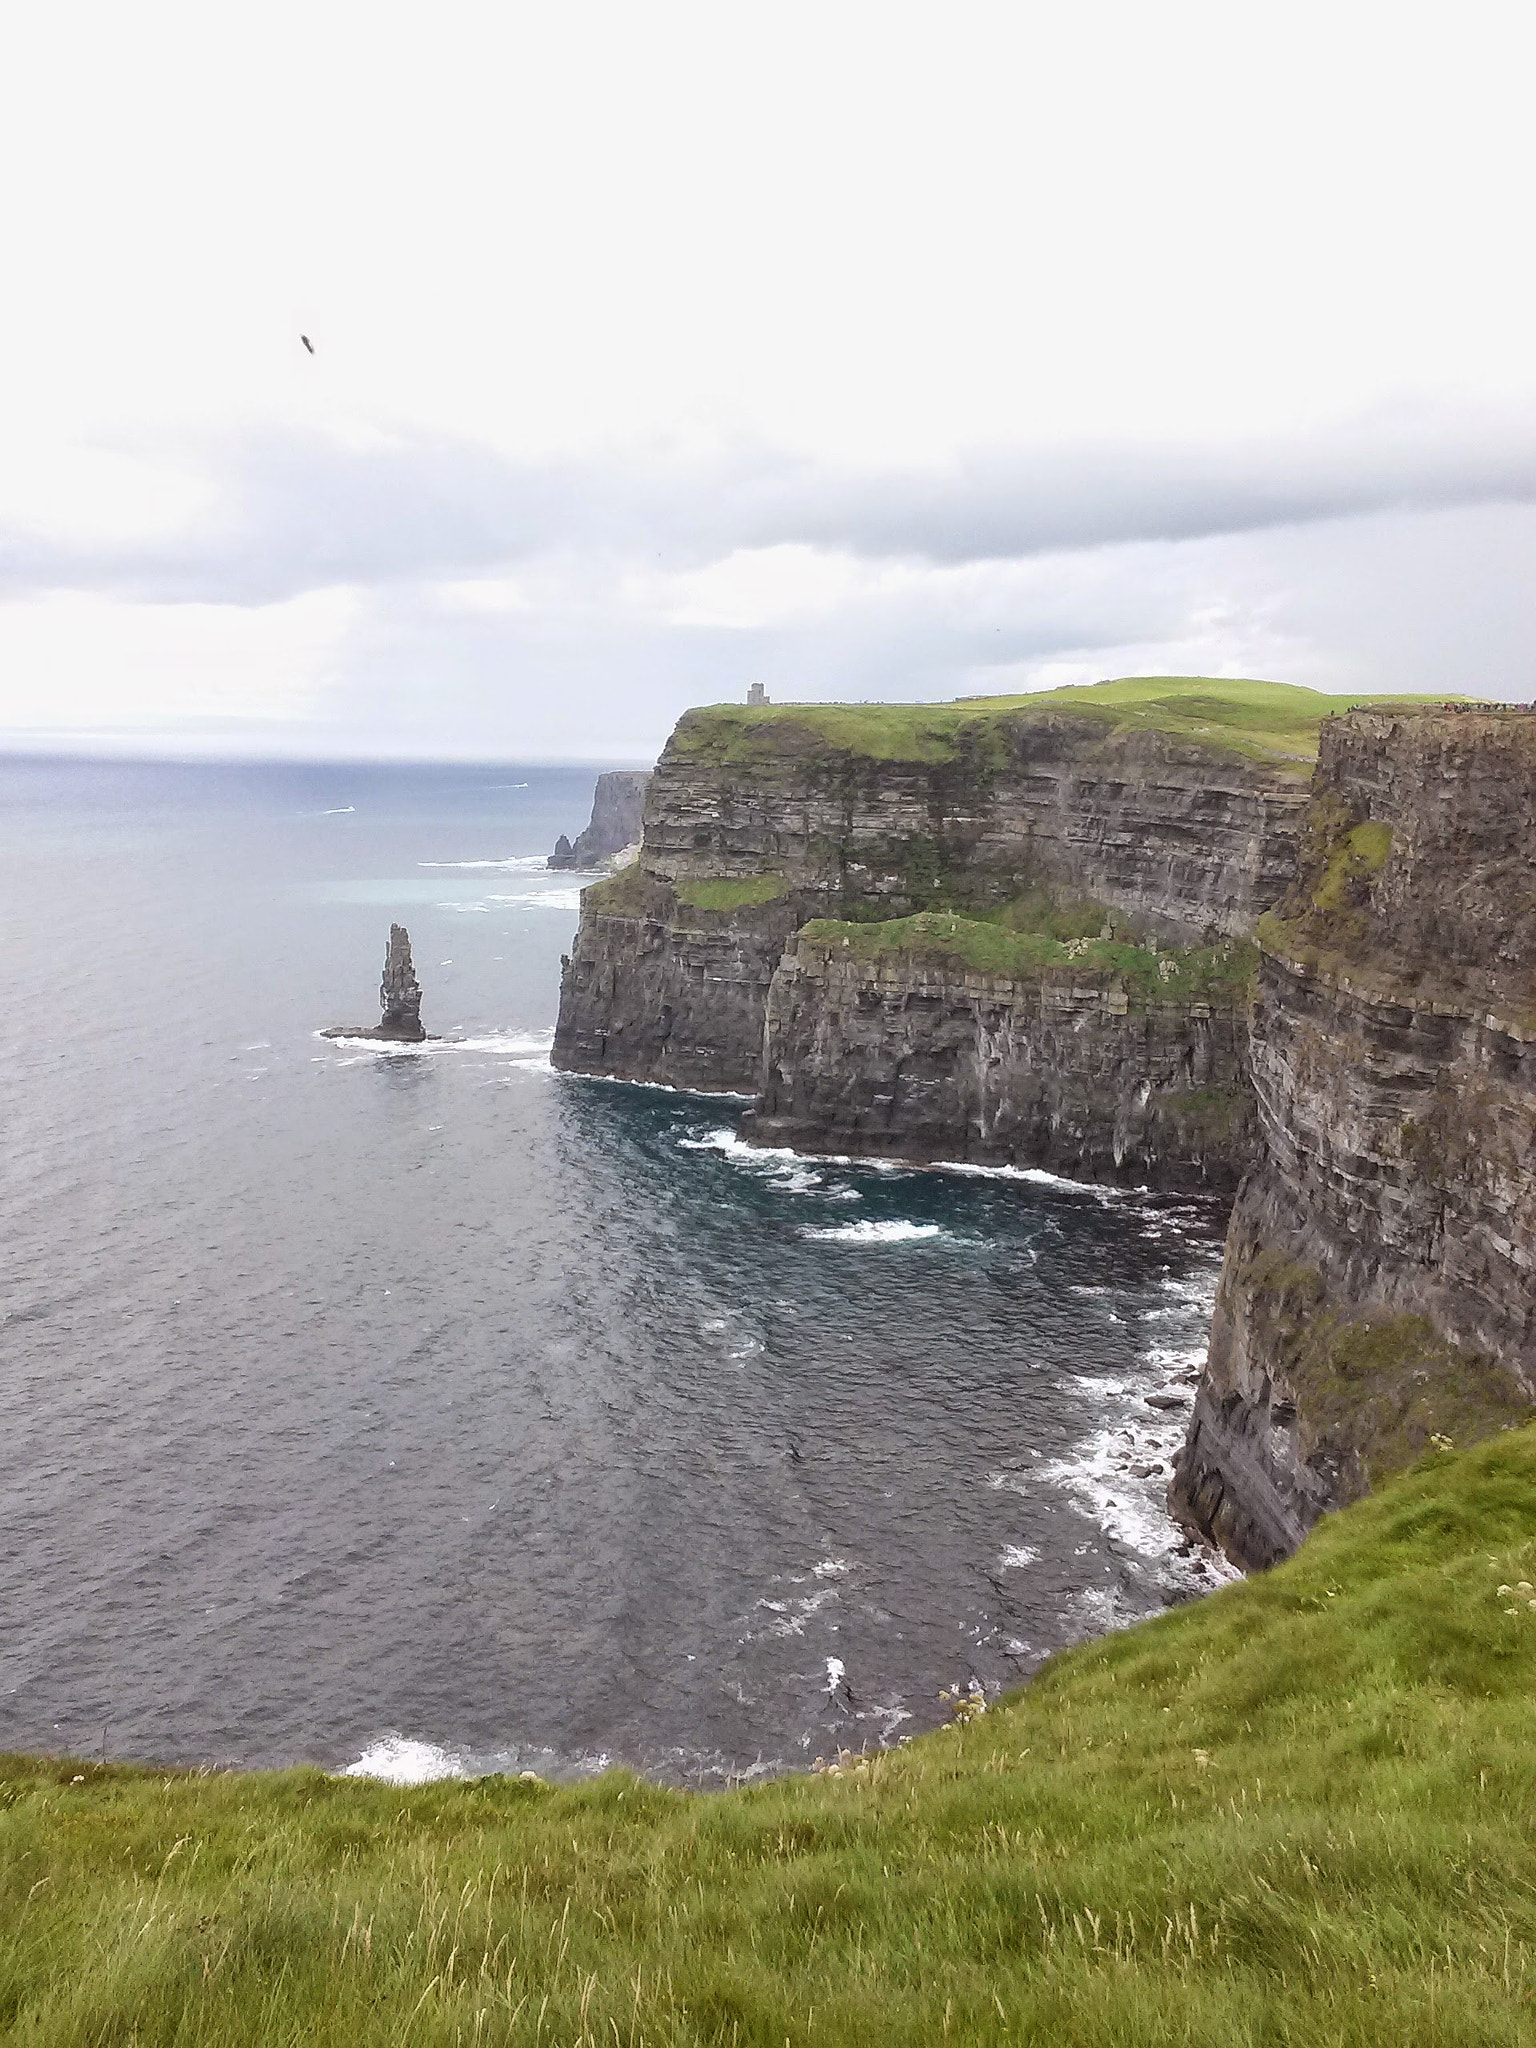 LG Optimus F6 sample photo. Cliffs of moher photography